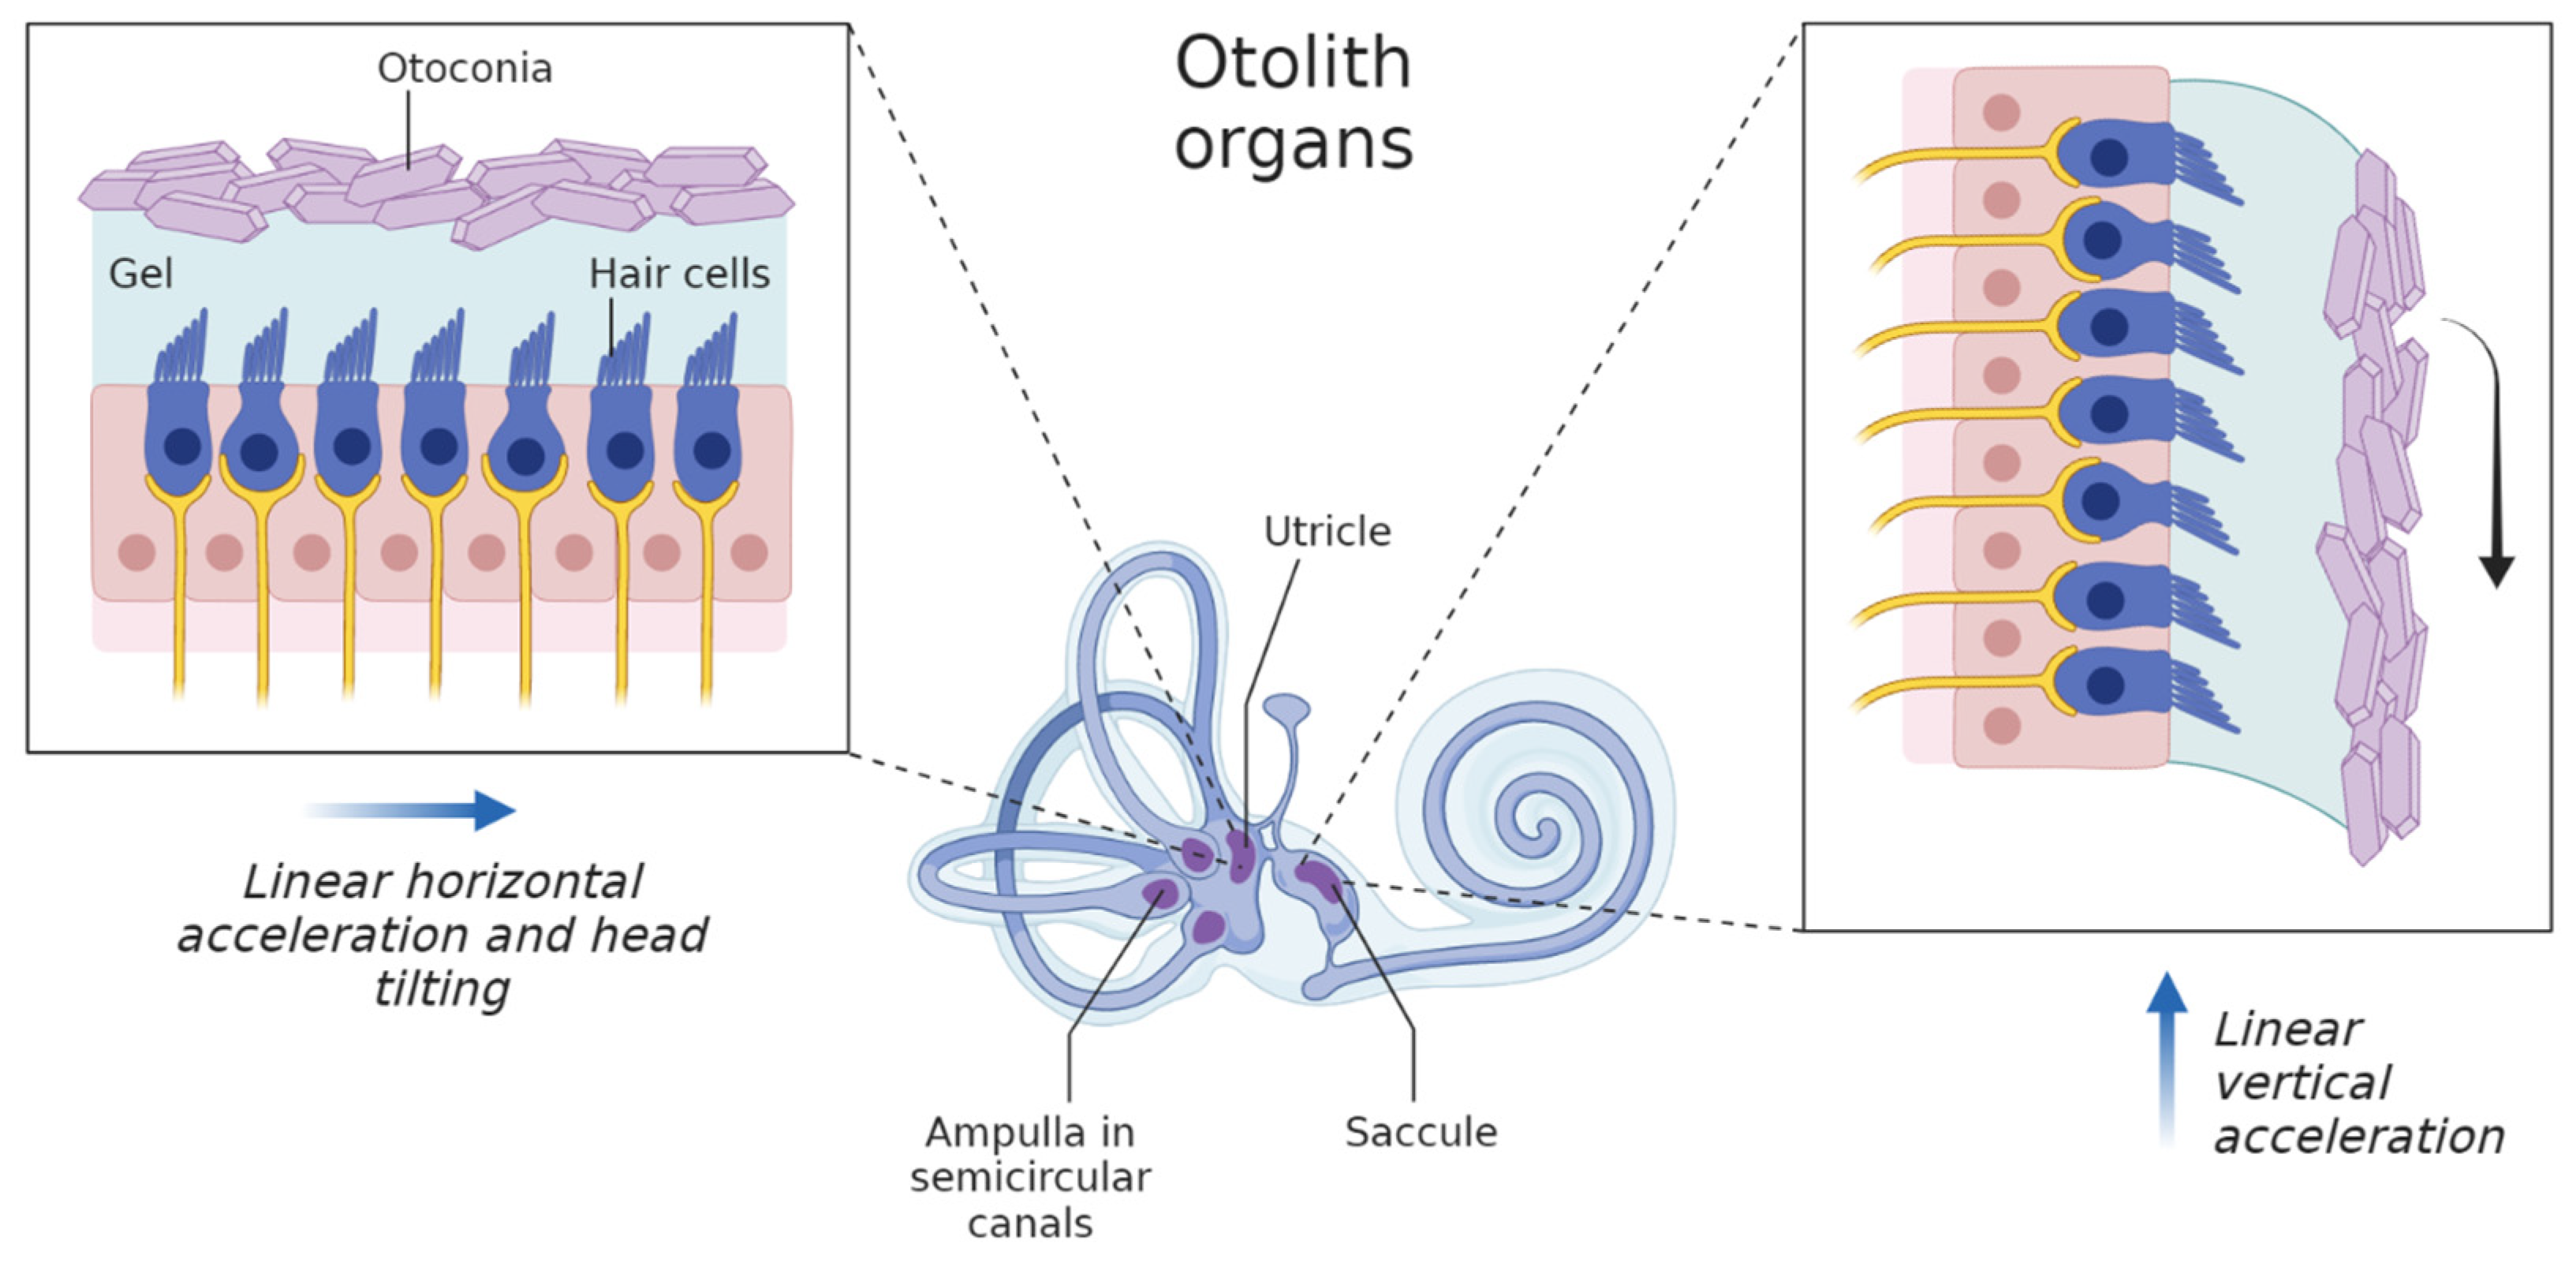 otolith organs and semicircular canals